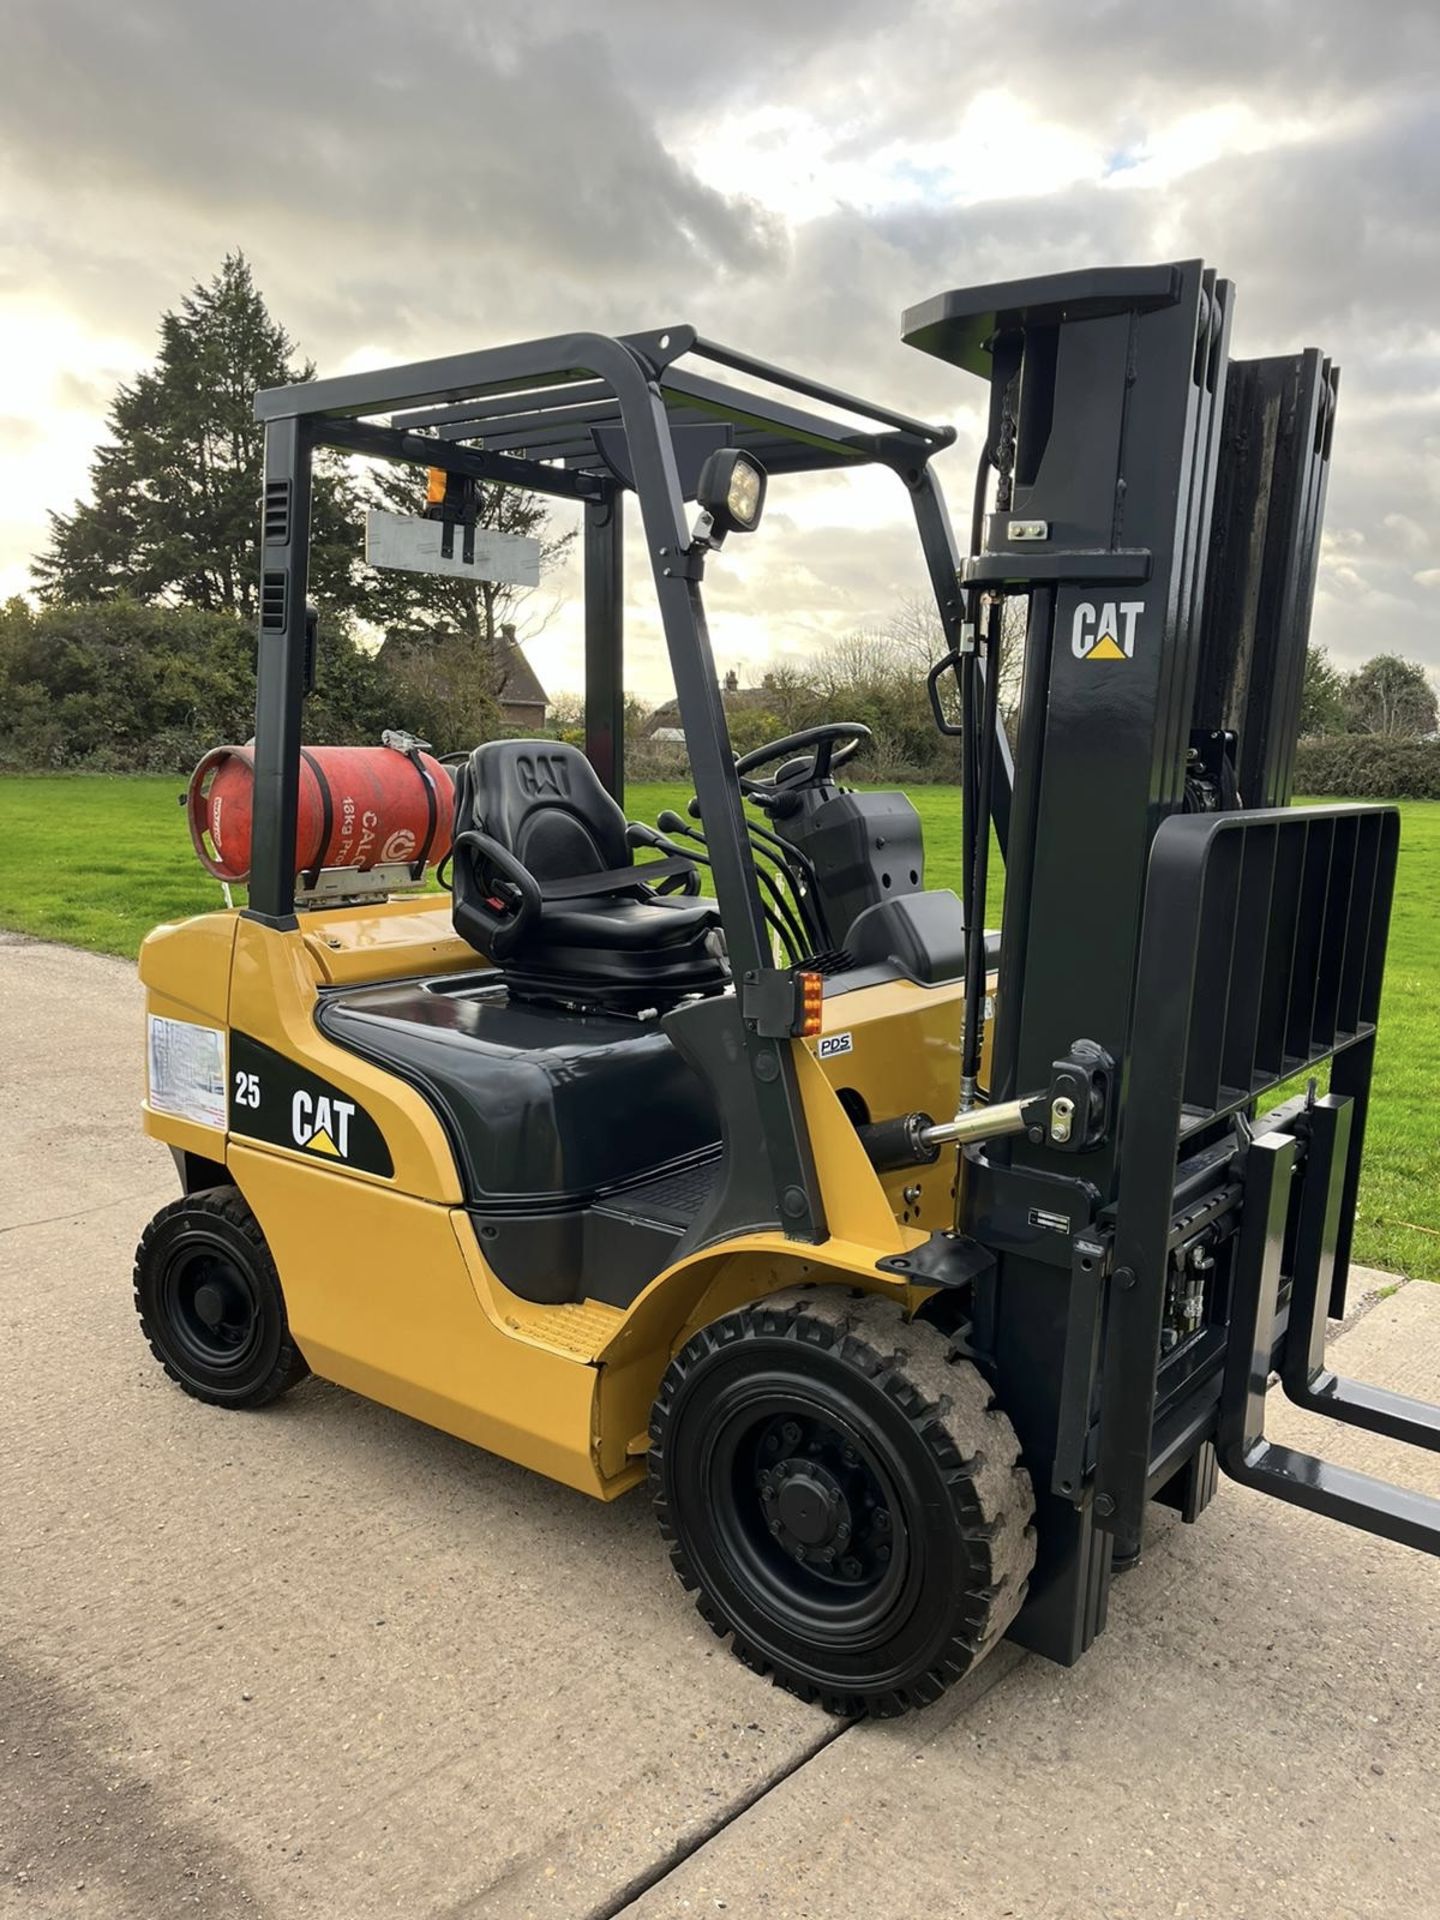 2017, CATERPILLAR 2.5 Tonne Gas Forklift (Container) Triple Mast - Image 2 of 10